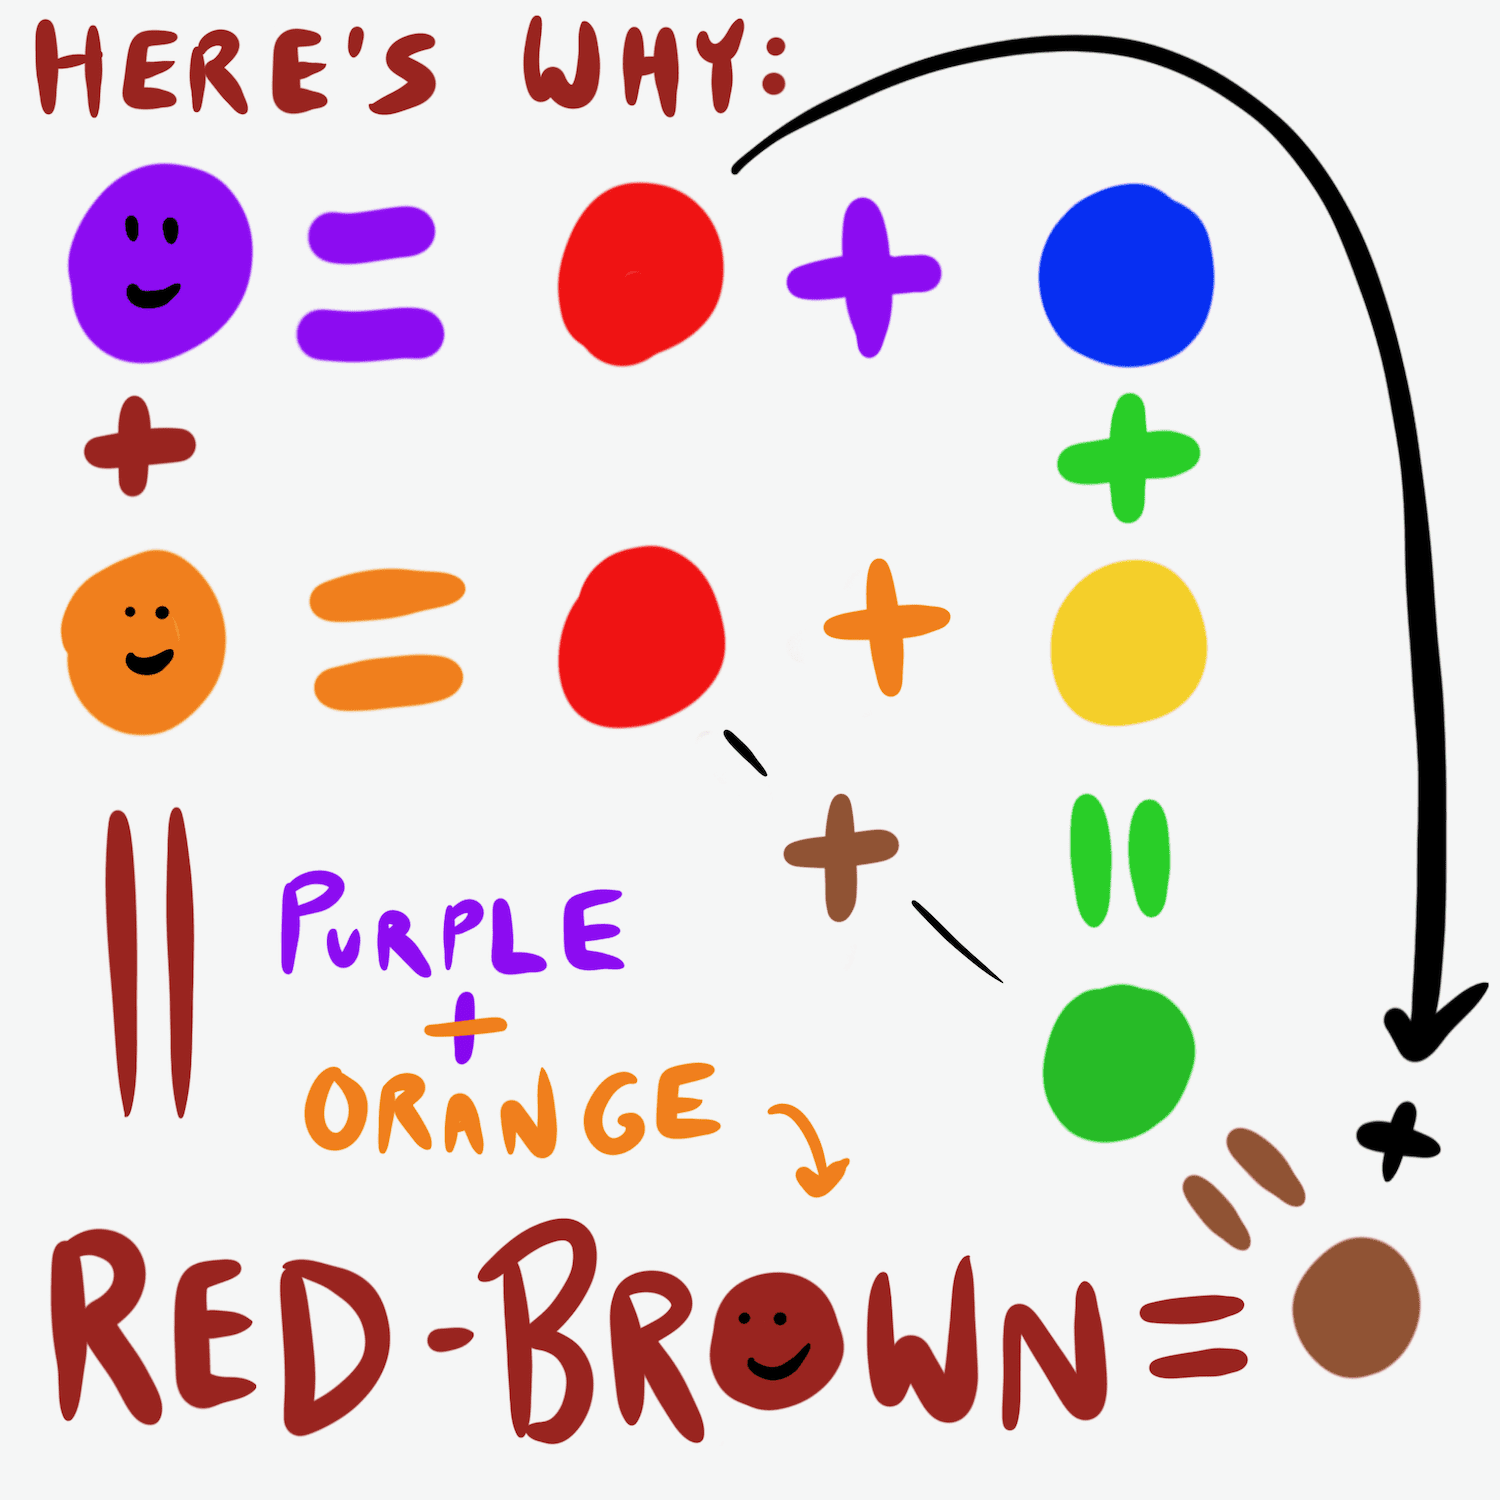 The color science behind why purple and orange make reddish-brown.